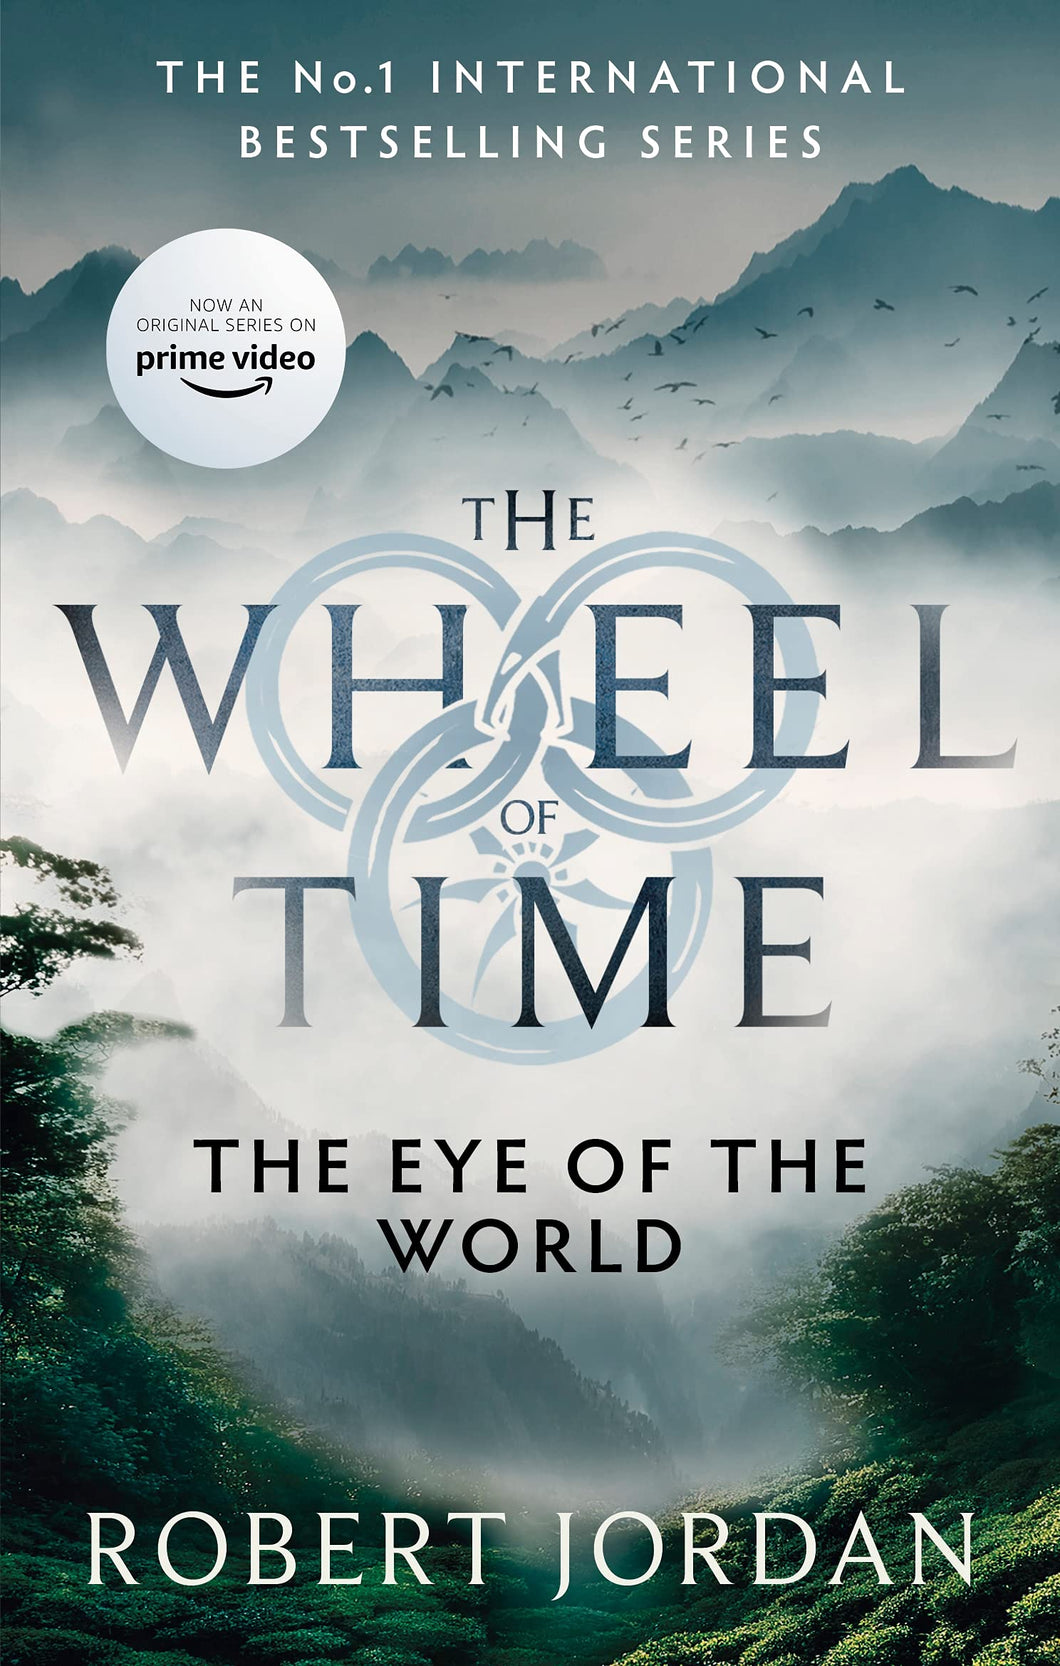 The Eye of the World- The Wheel of Time Book 1